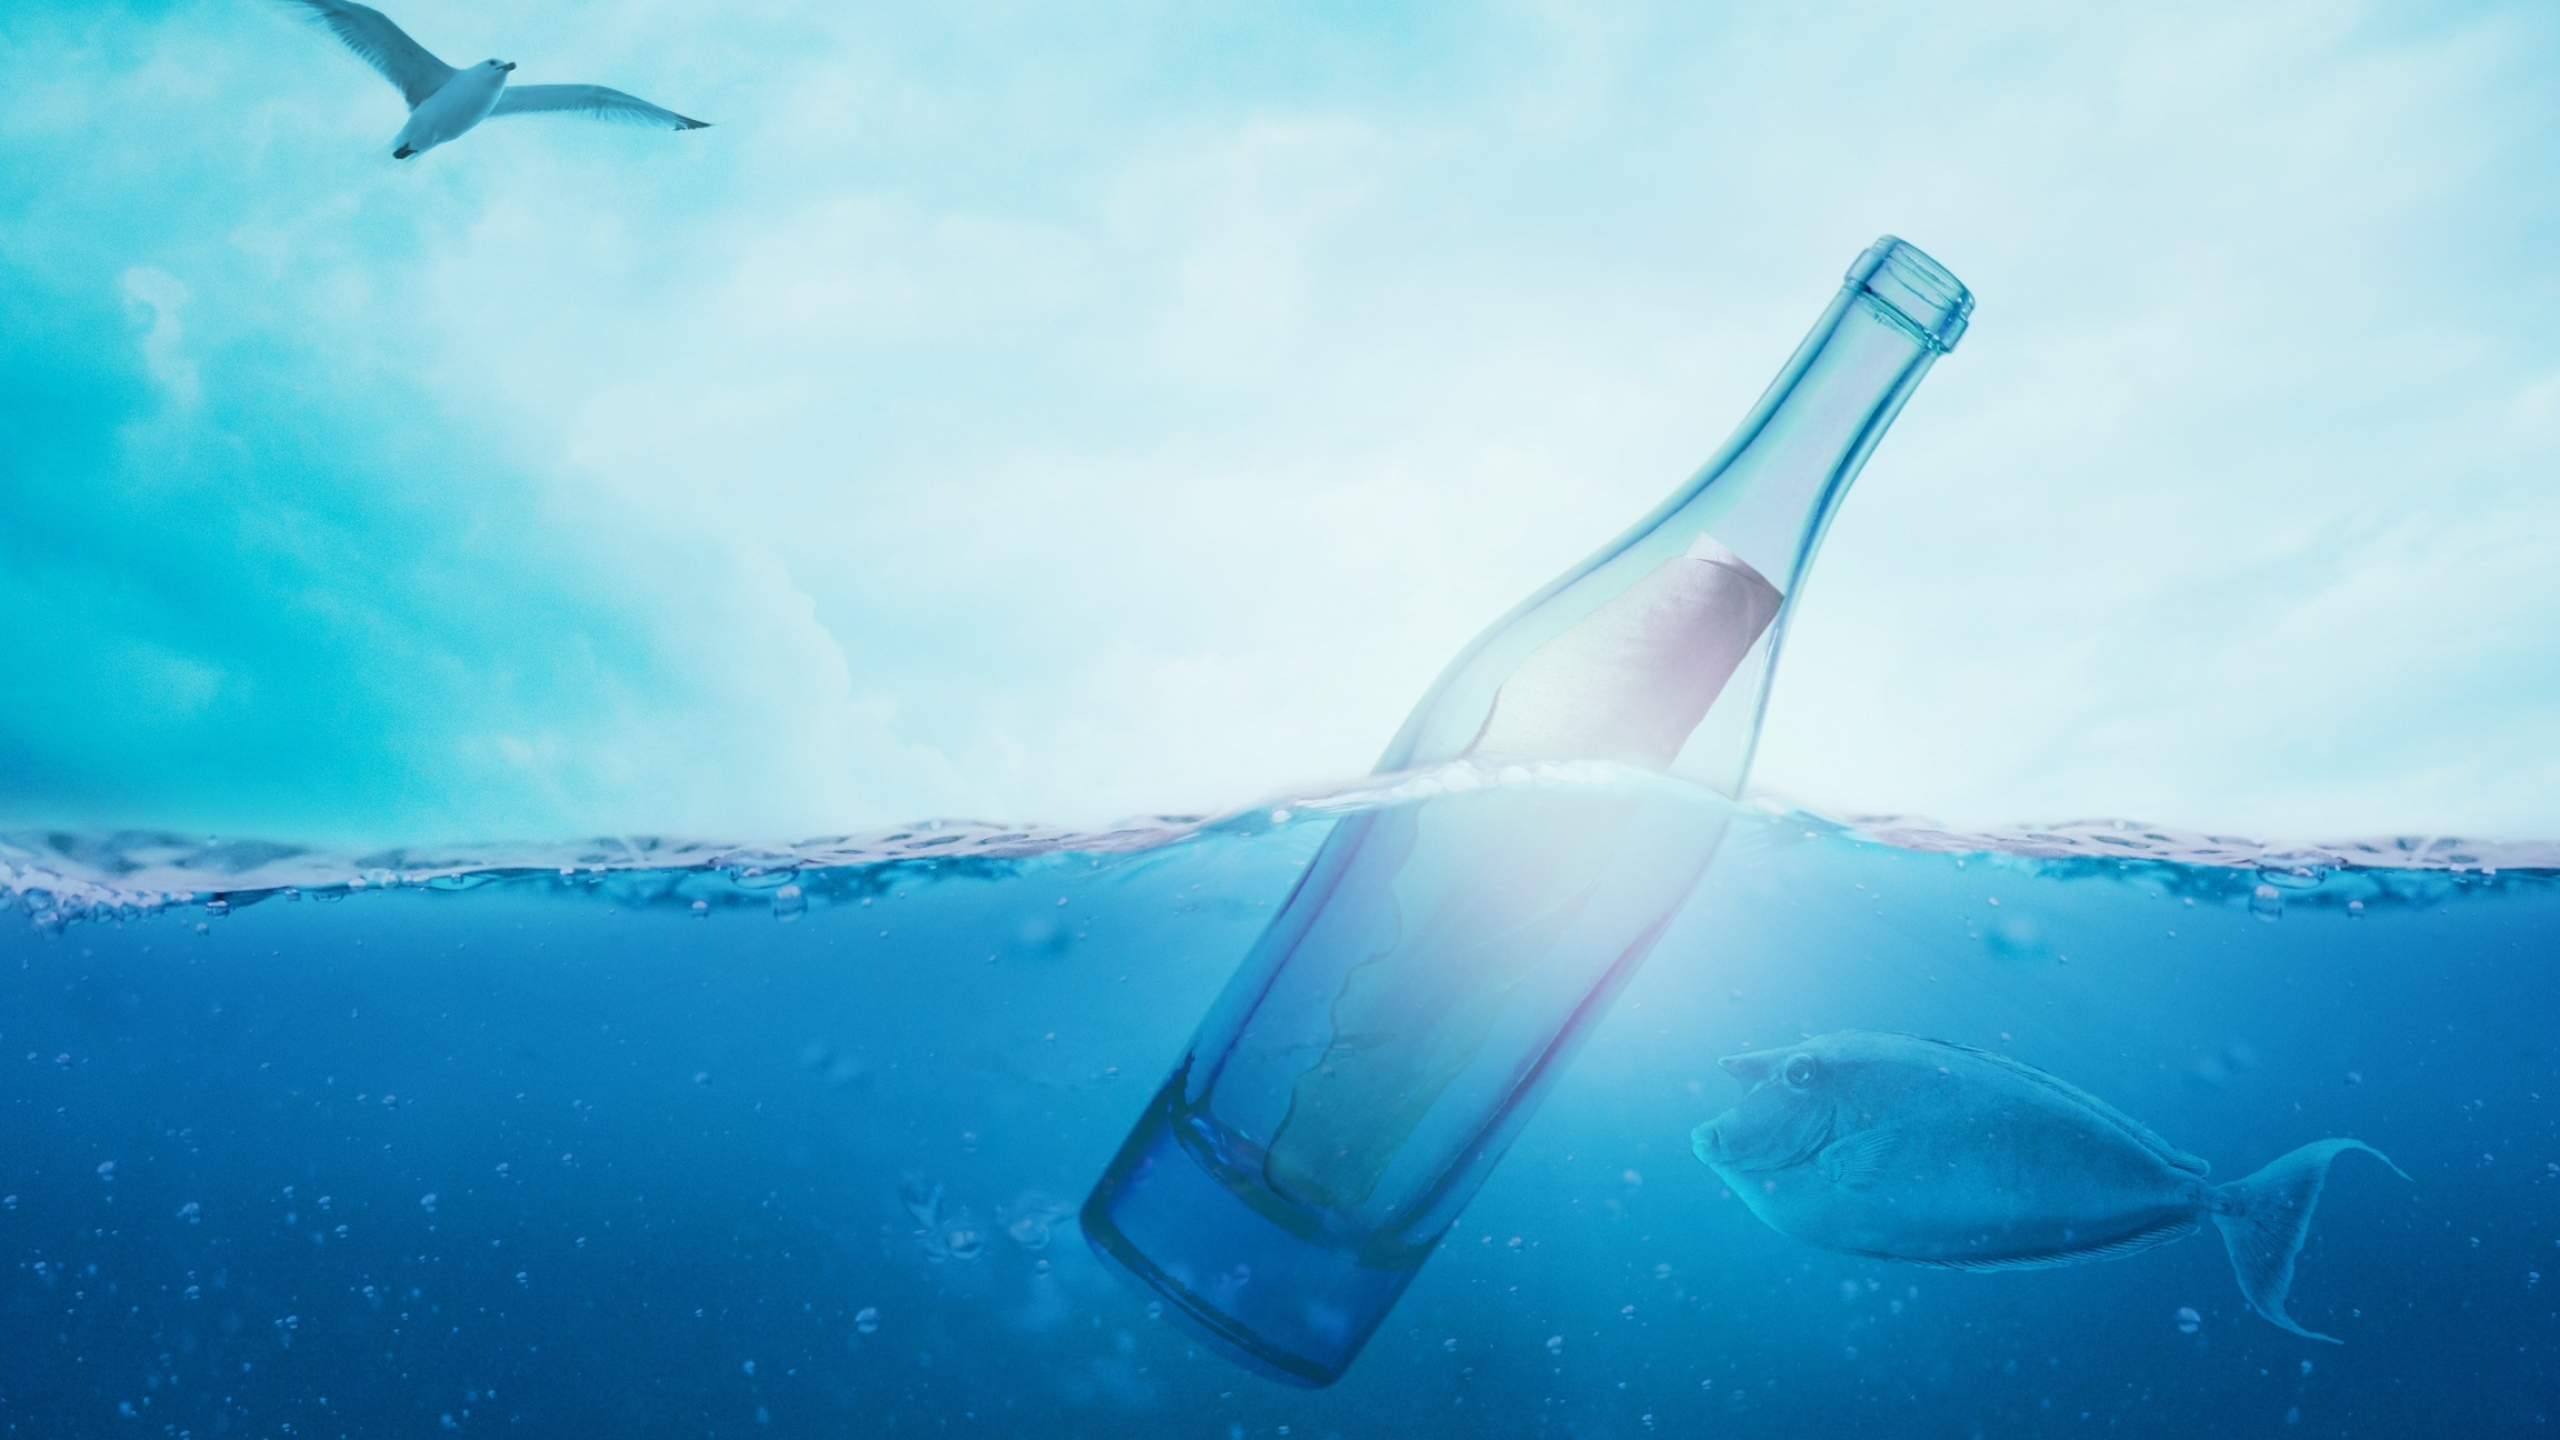 Message in a Bottle: The Greek philosopher Theophrastus used it to study ocean currents. 2560x1440 HD Wallpaper.